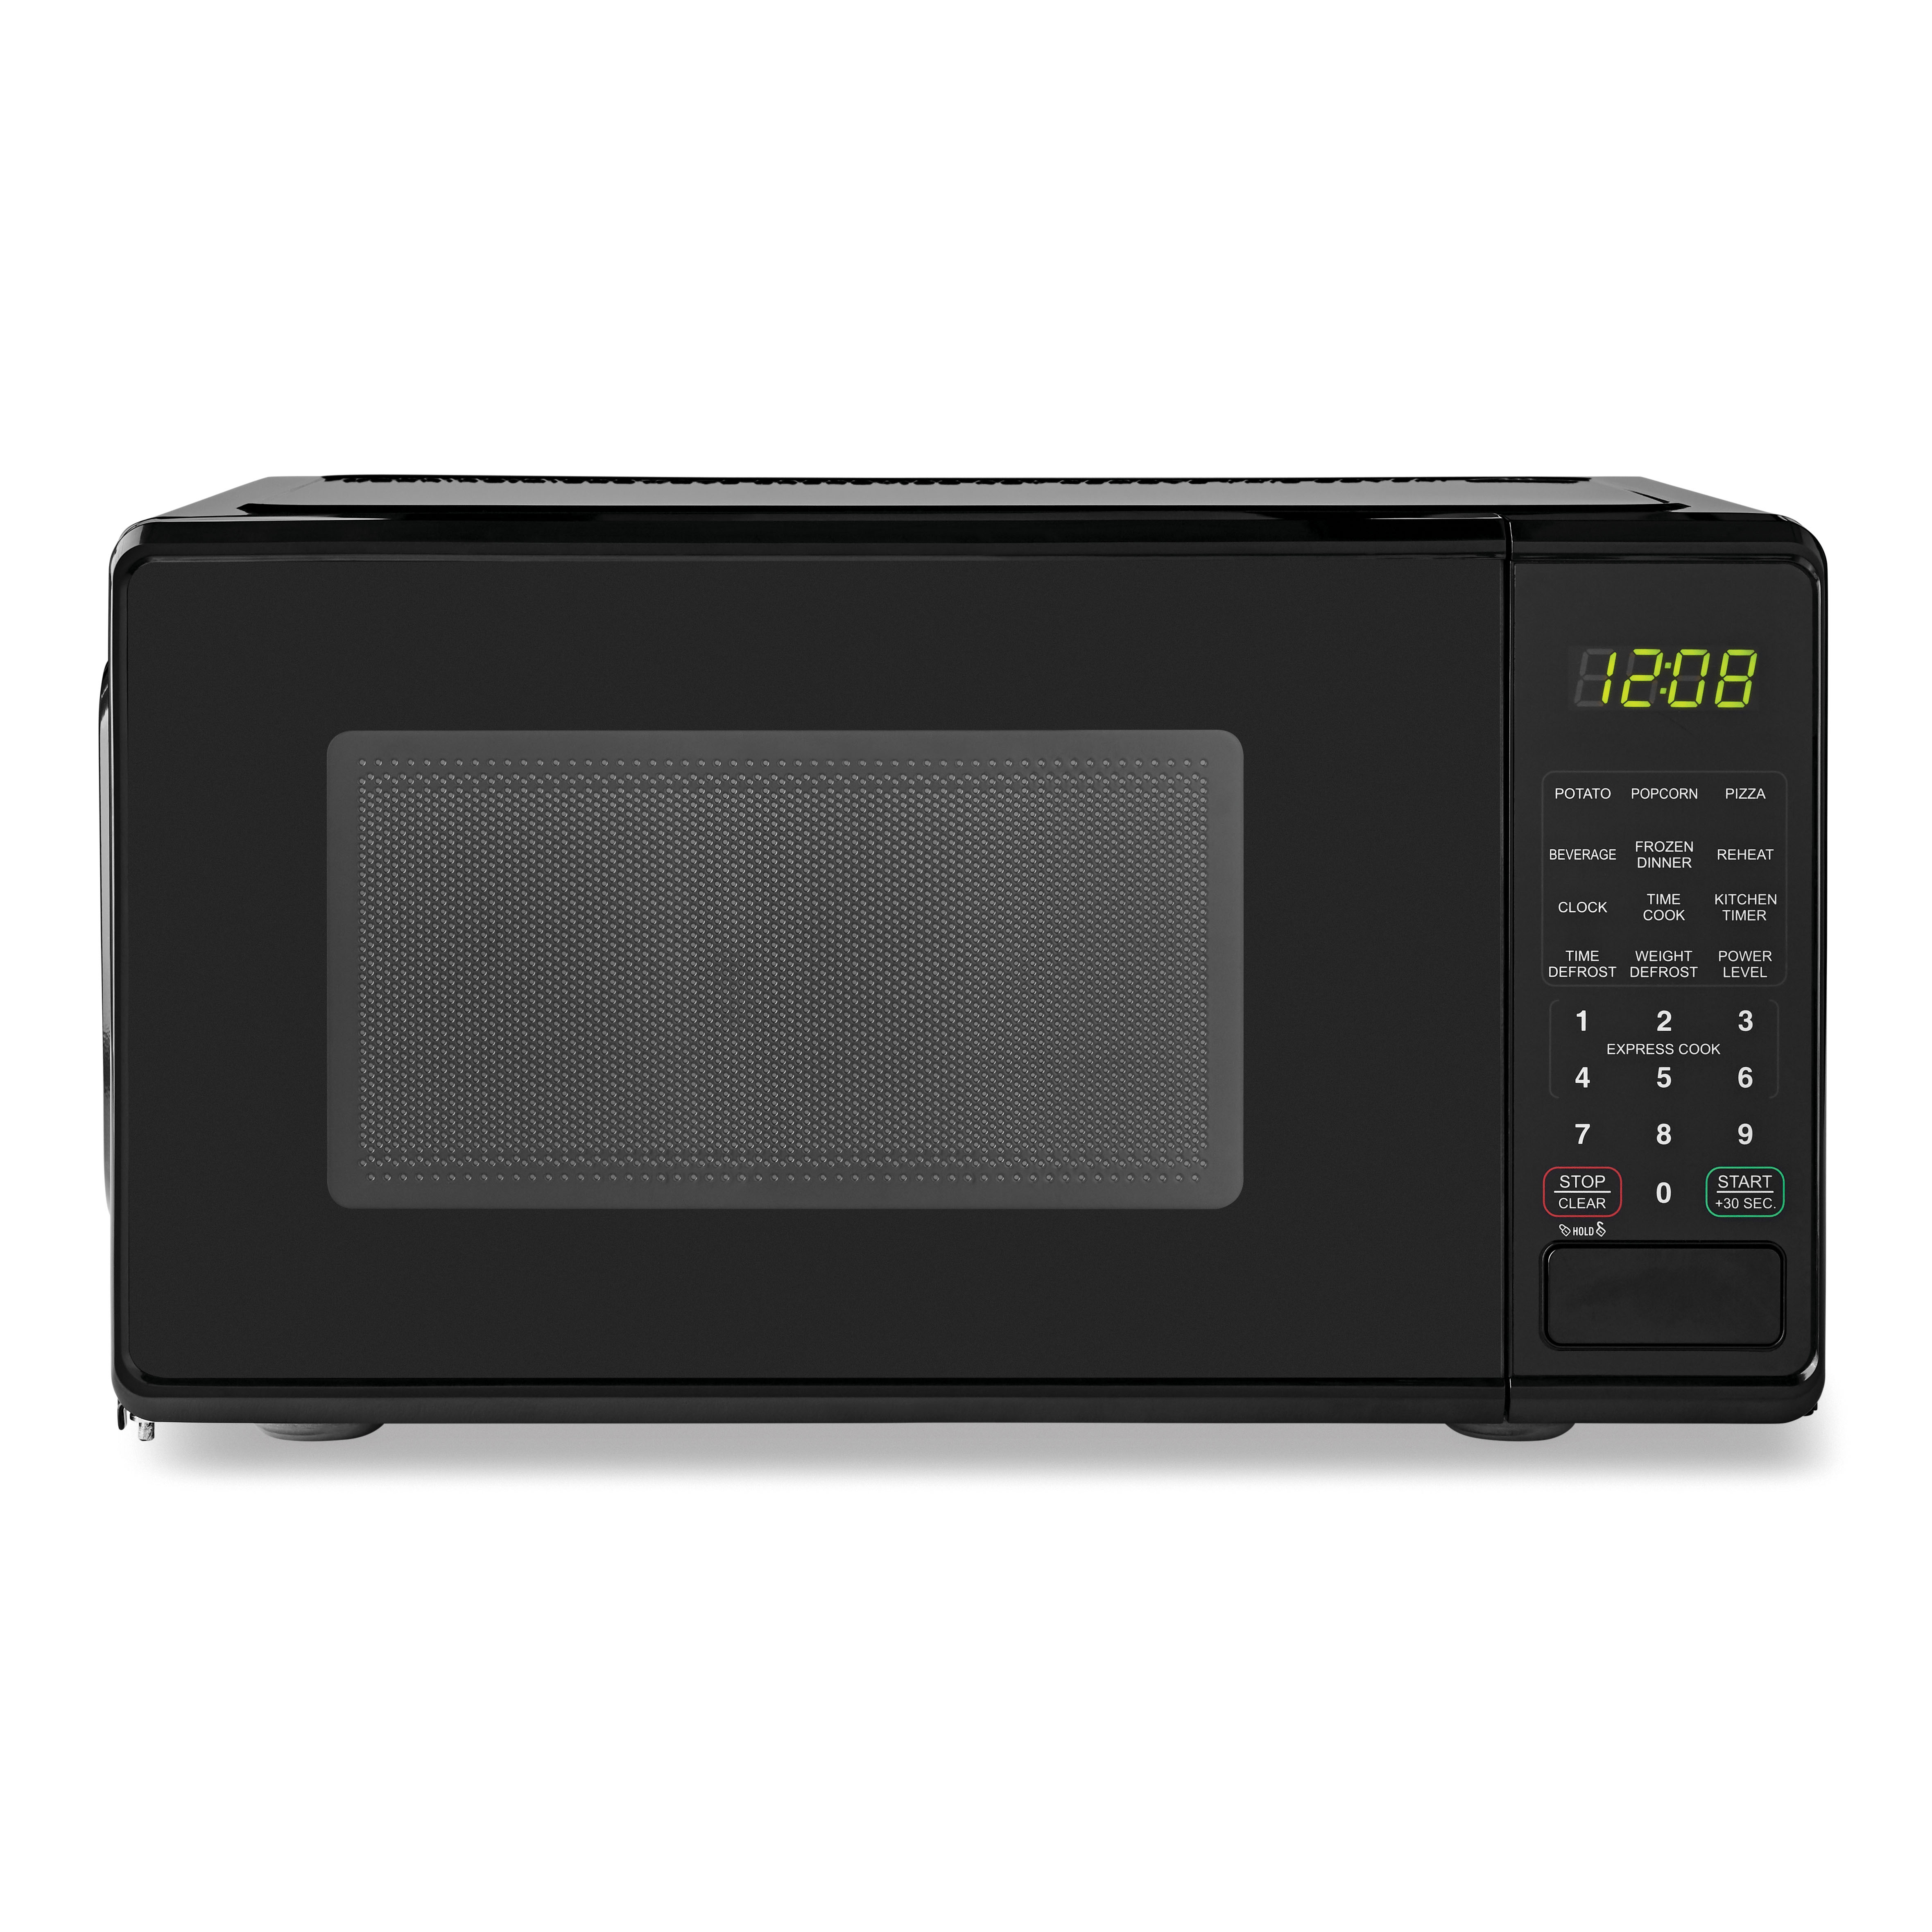 Mainstays 0.7 Cu ft Countertop Microwave Oven, 700 Watts, Black, New - image 1 of 10